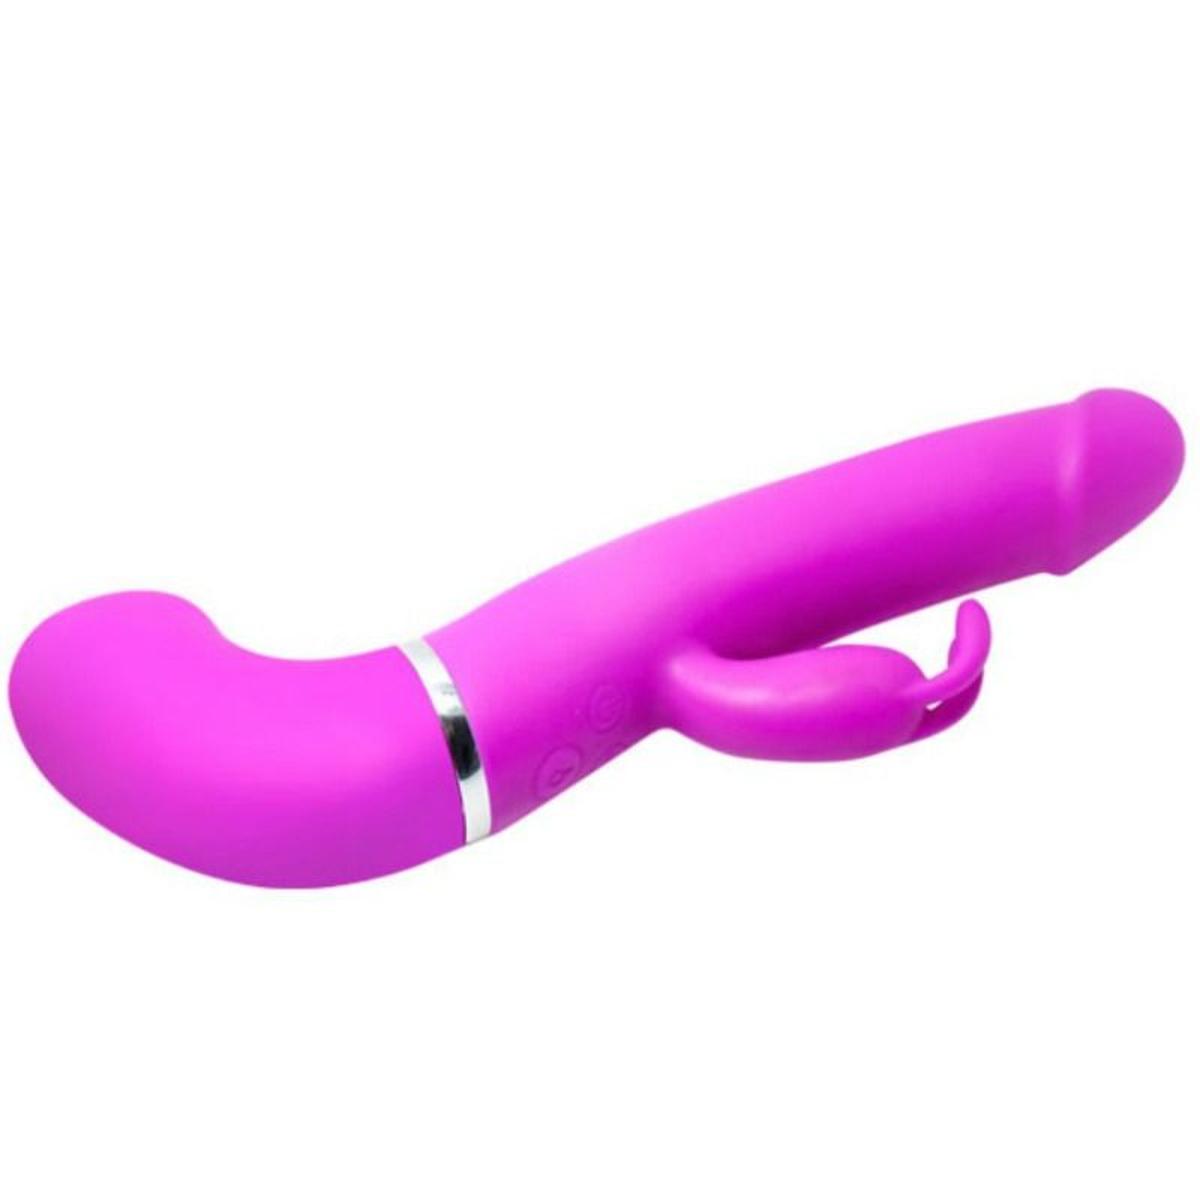 Rabbitvibrator "Henry" mit Squirt-Funktion - OH MY! FANTASY